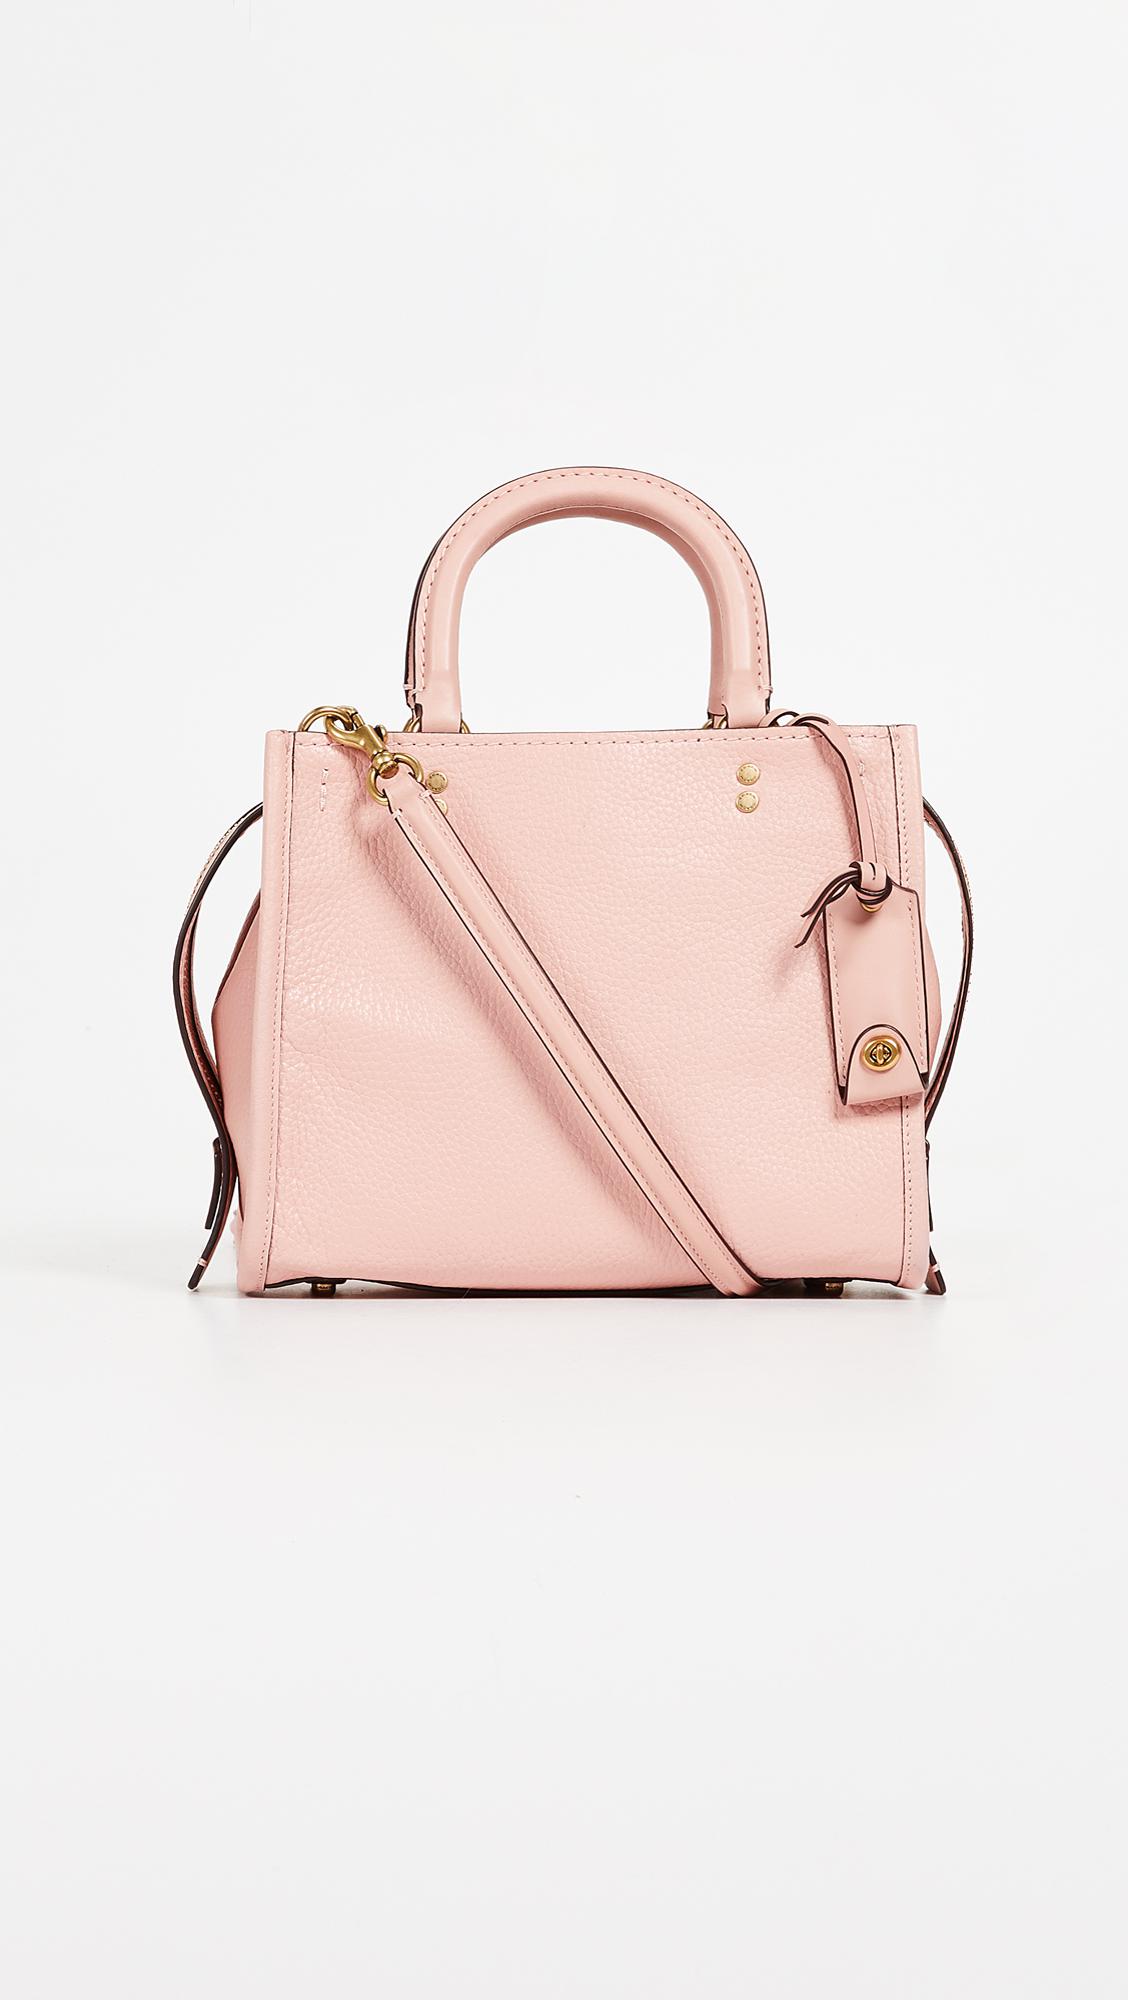 COACH Rogue Pebble Leather Bag in Pink - Lyst